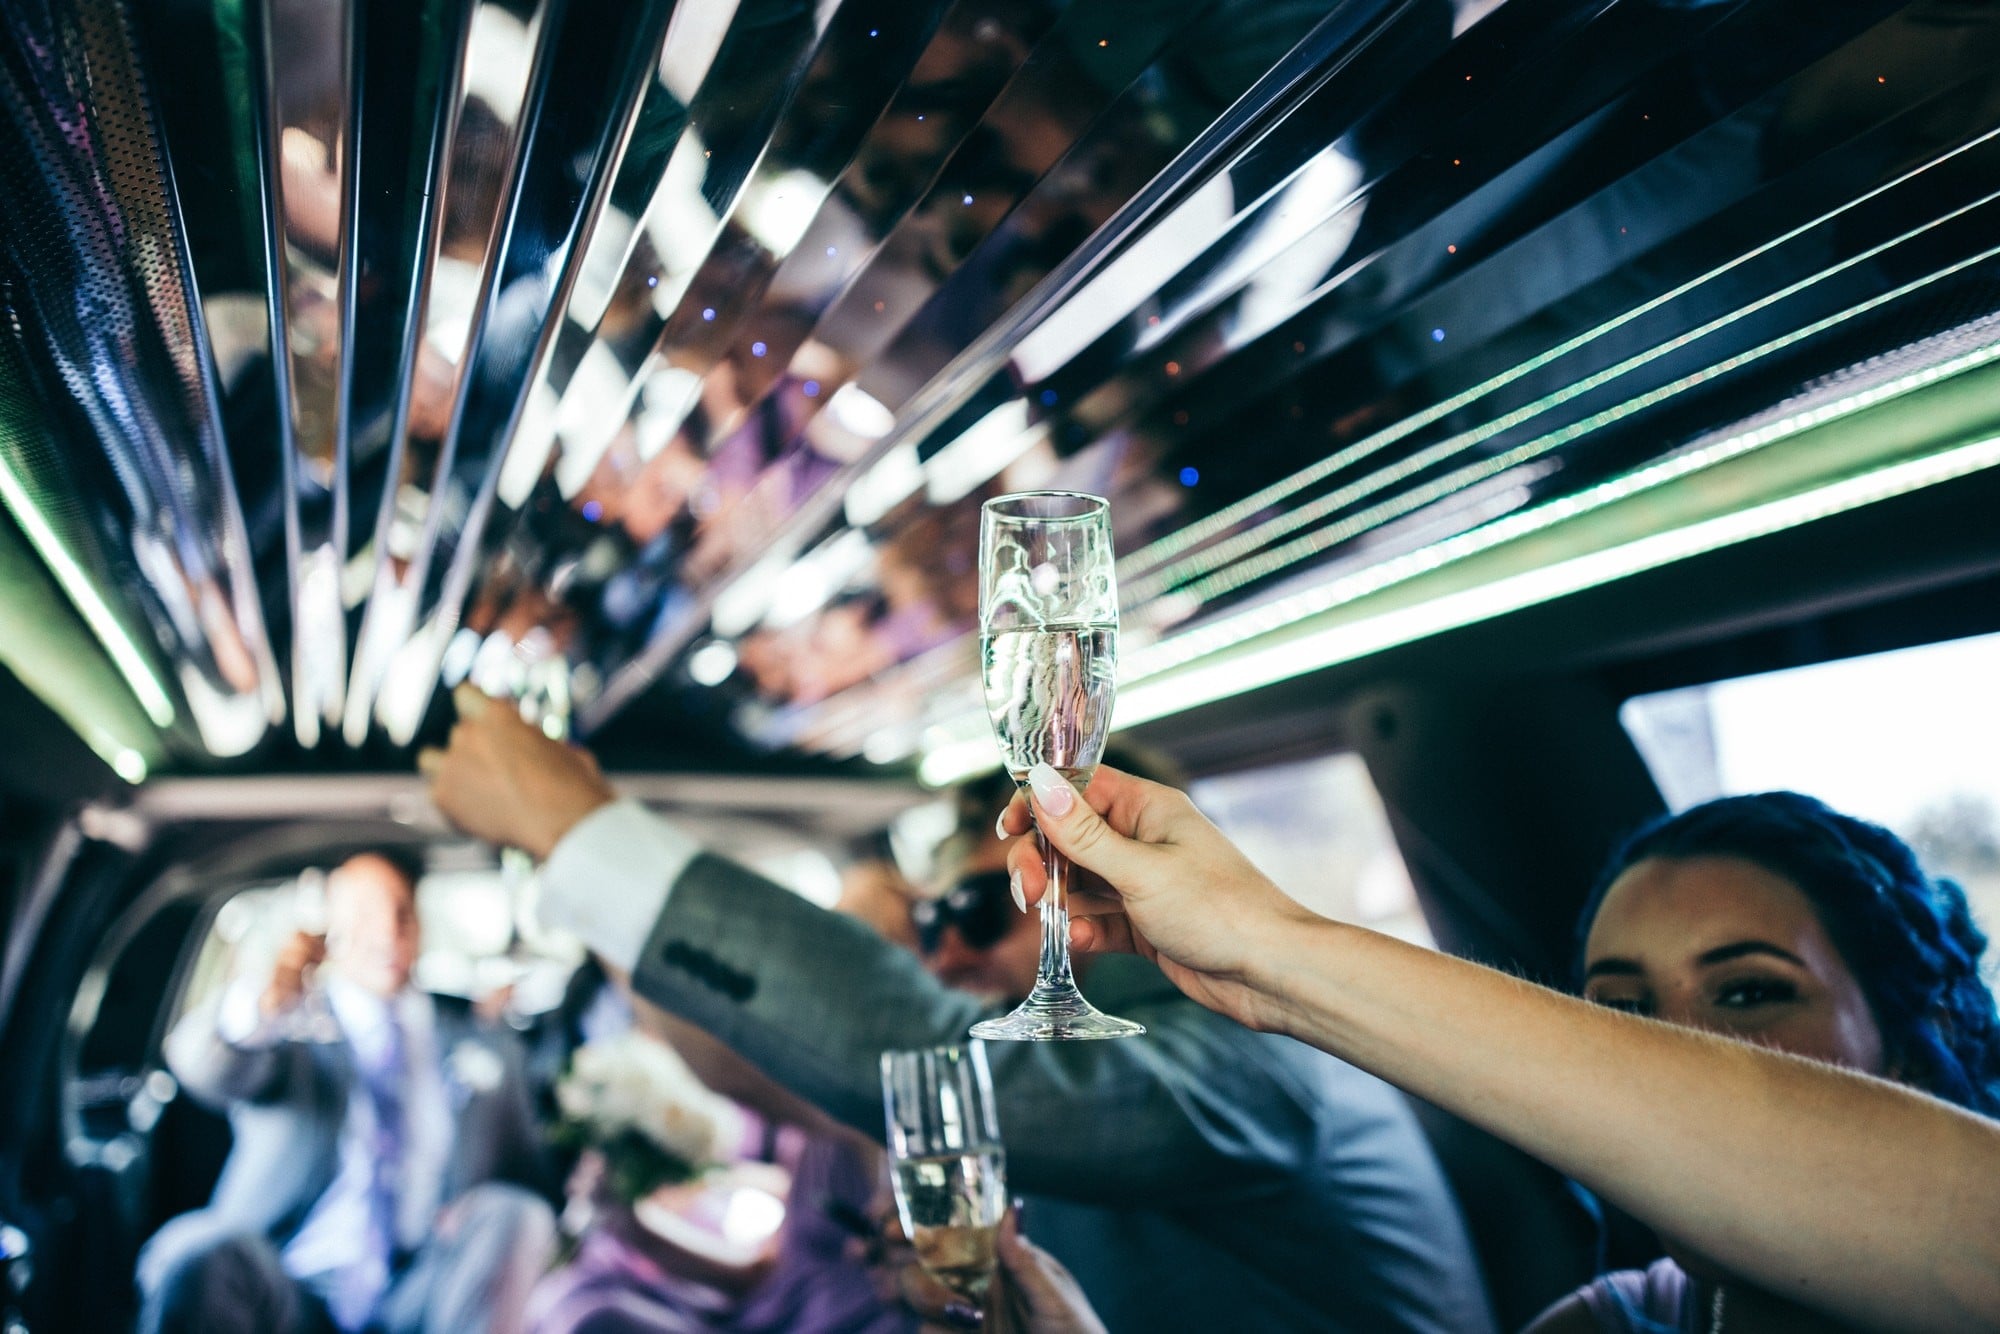 PARTY BUS SERVICE IN AUSTIN, TX